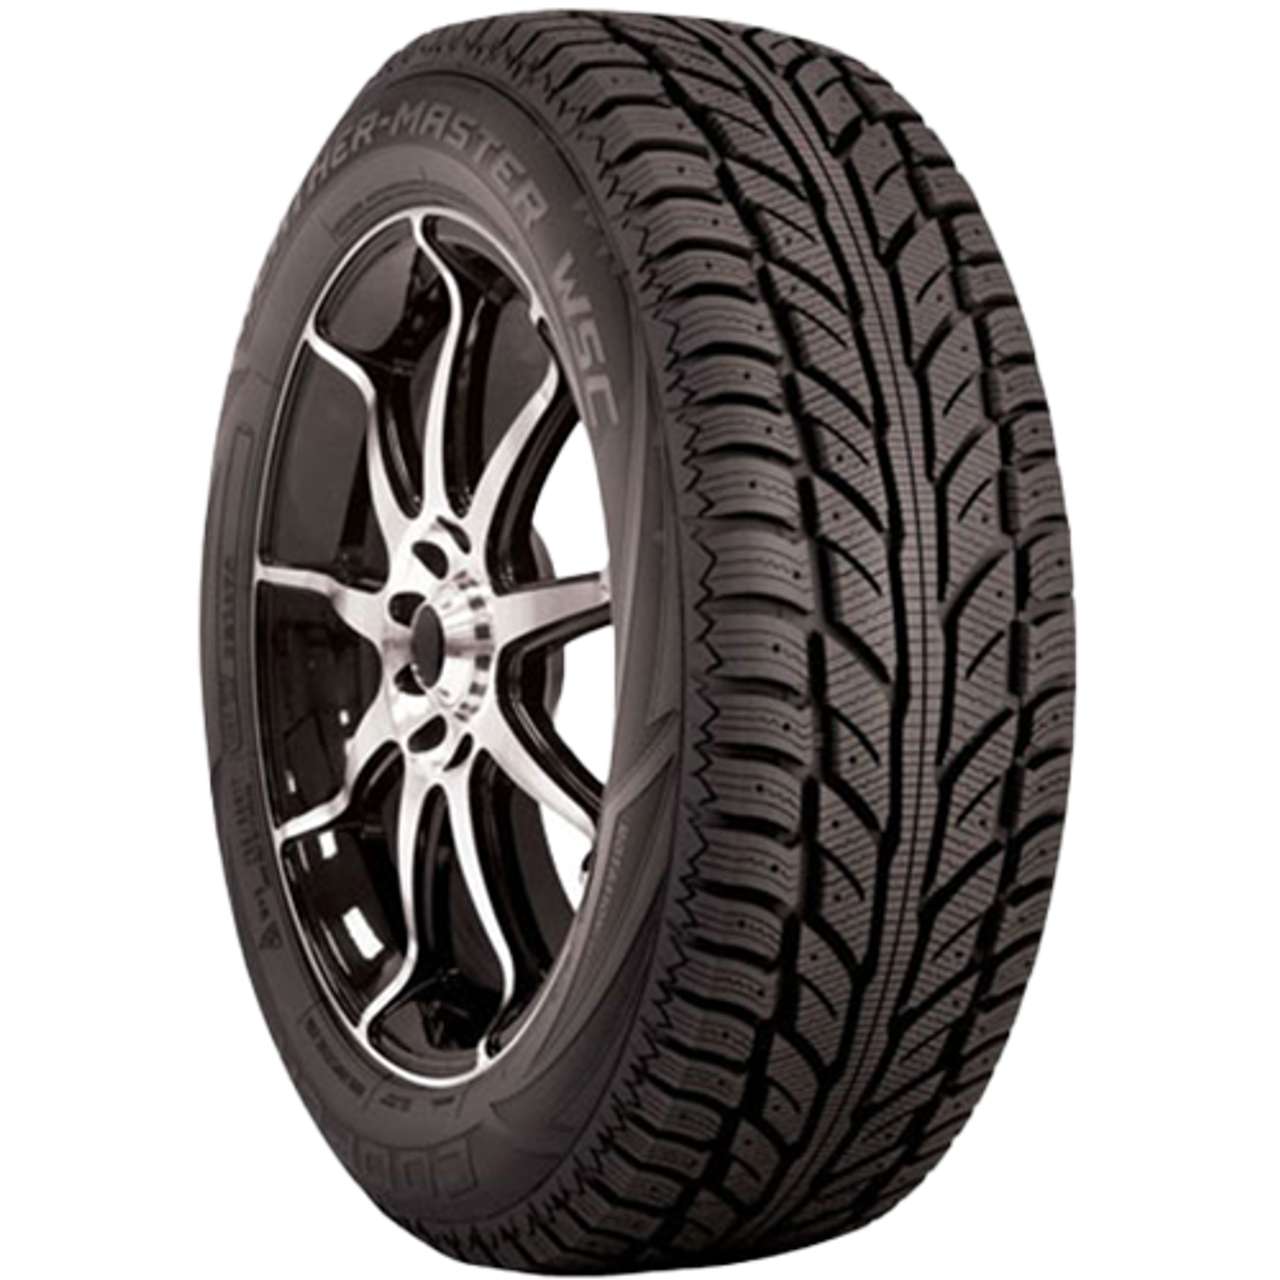 COOPER WEATHERMASTER WSC 225/65R17 102T STUDDABLE BSW